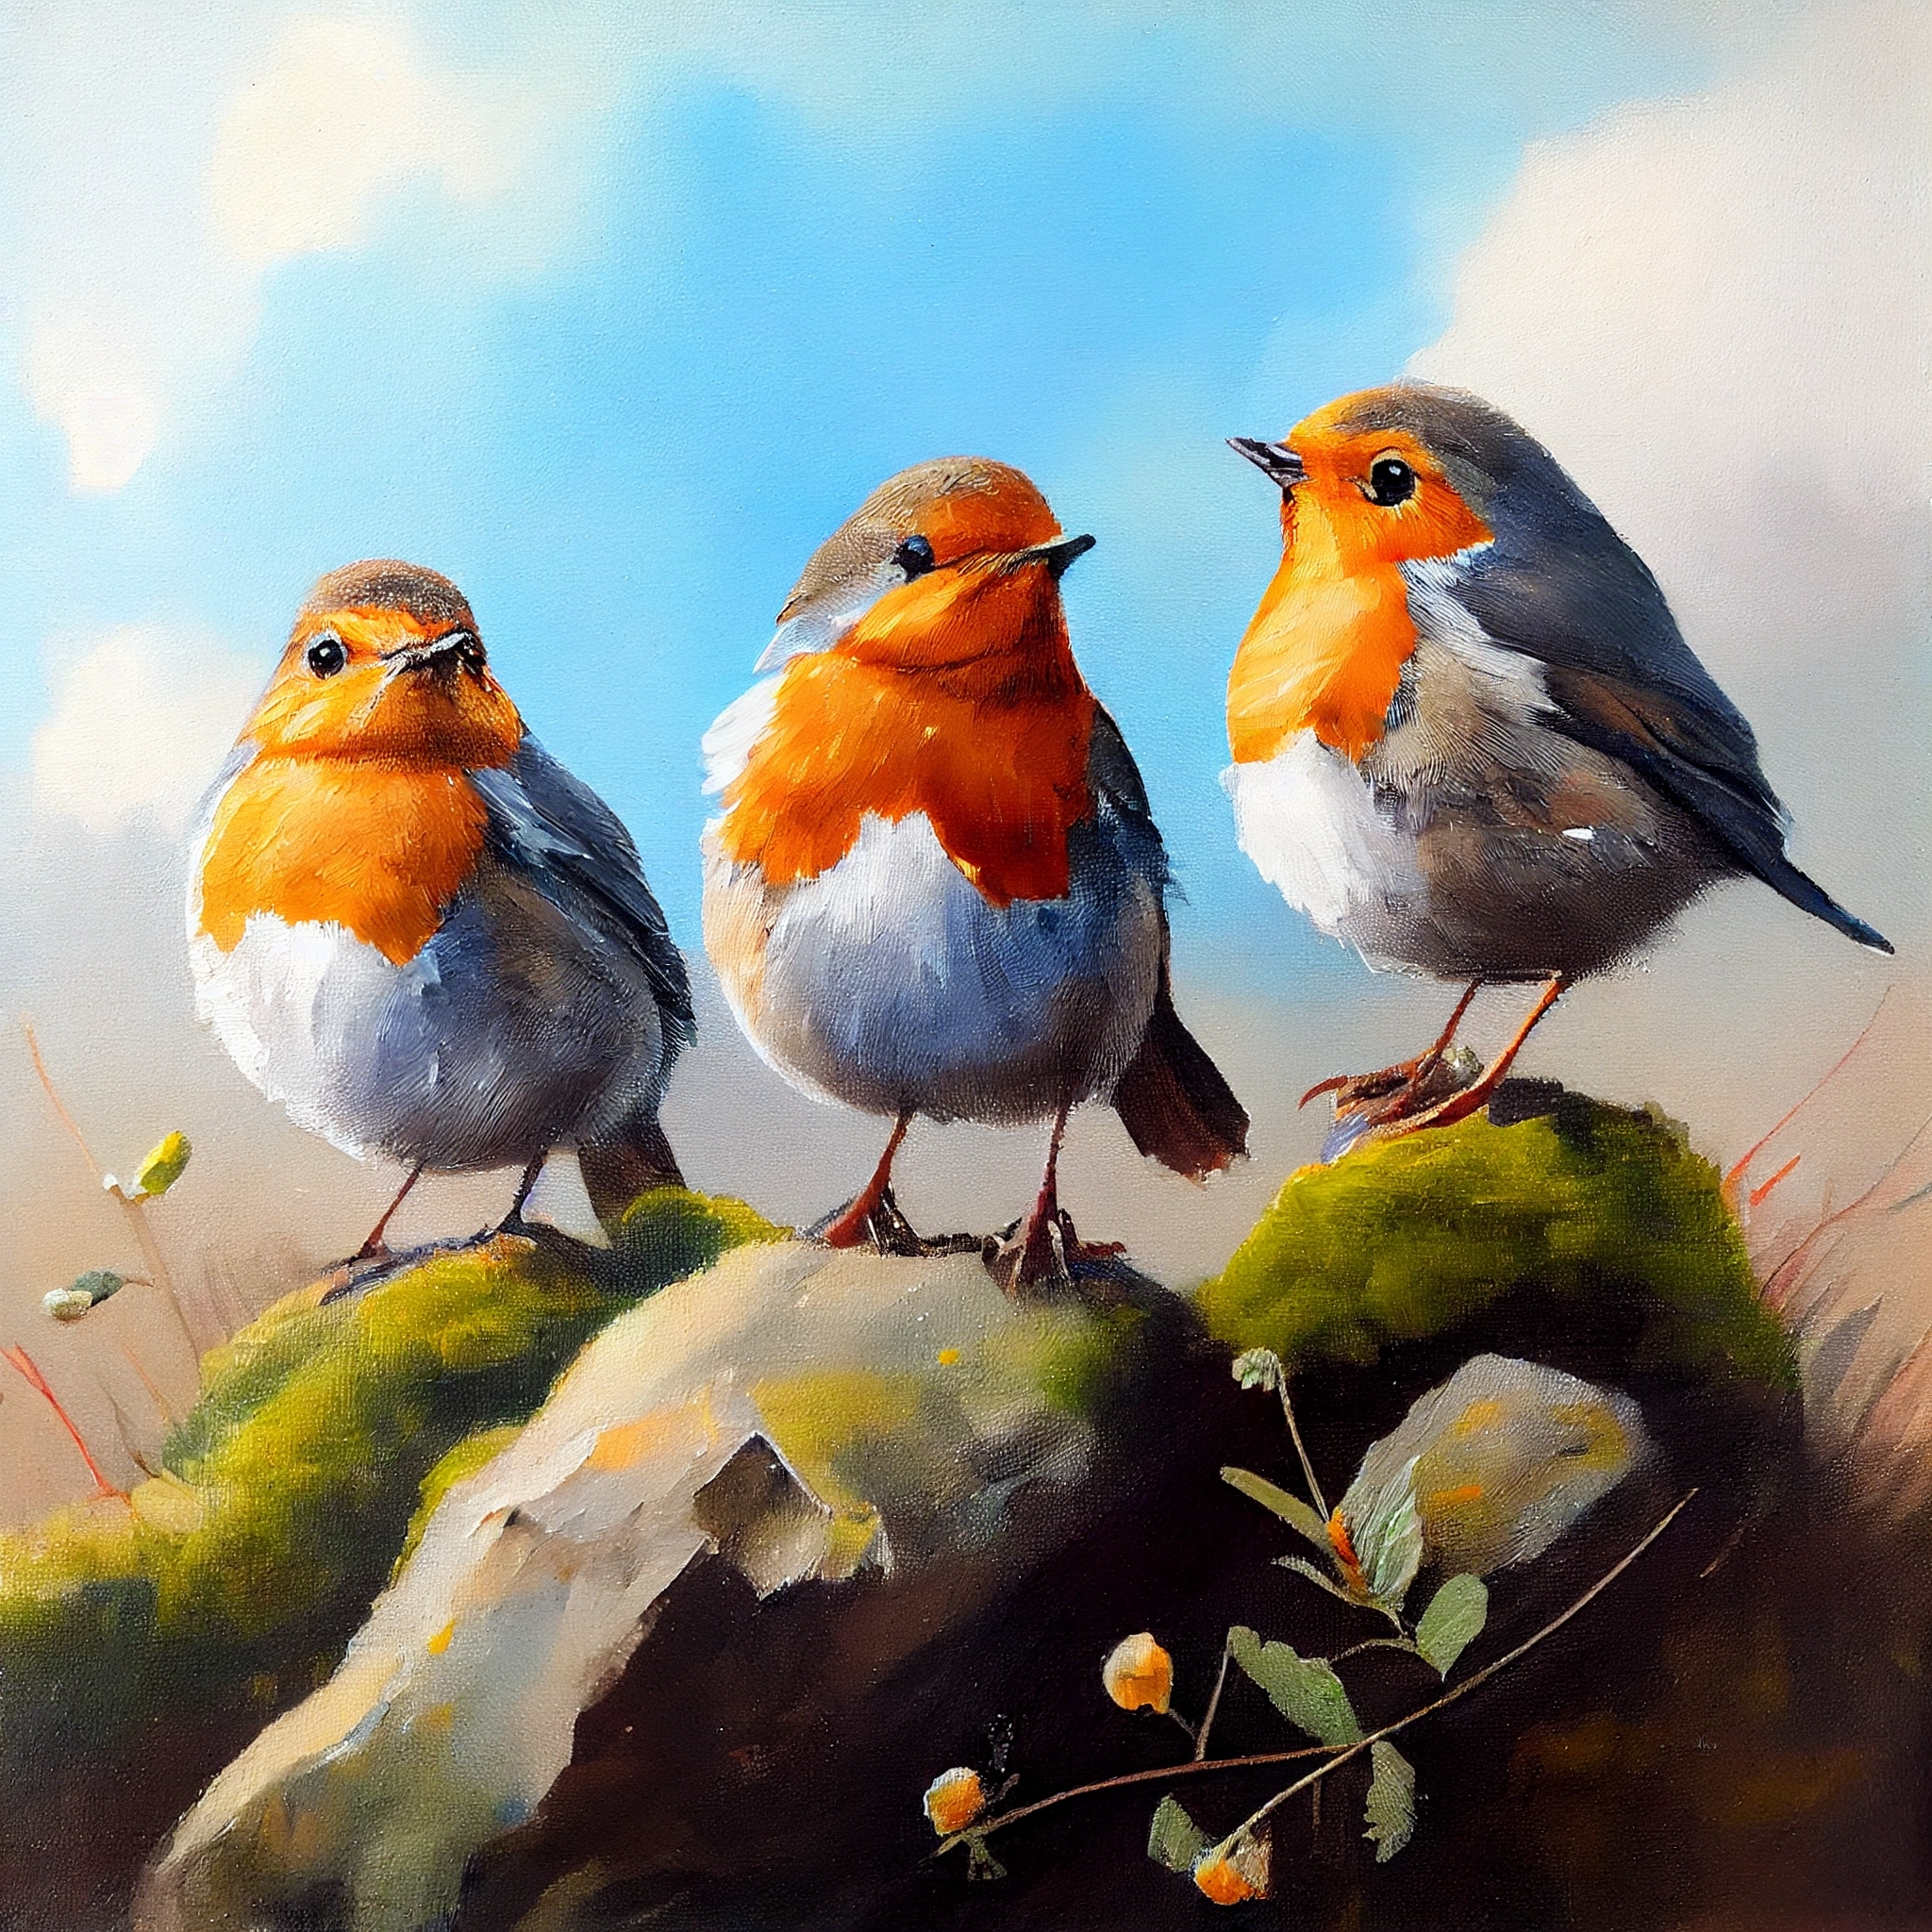 "Chirpy Trio: Oil Paint Print of Three Robins in Conversation"